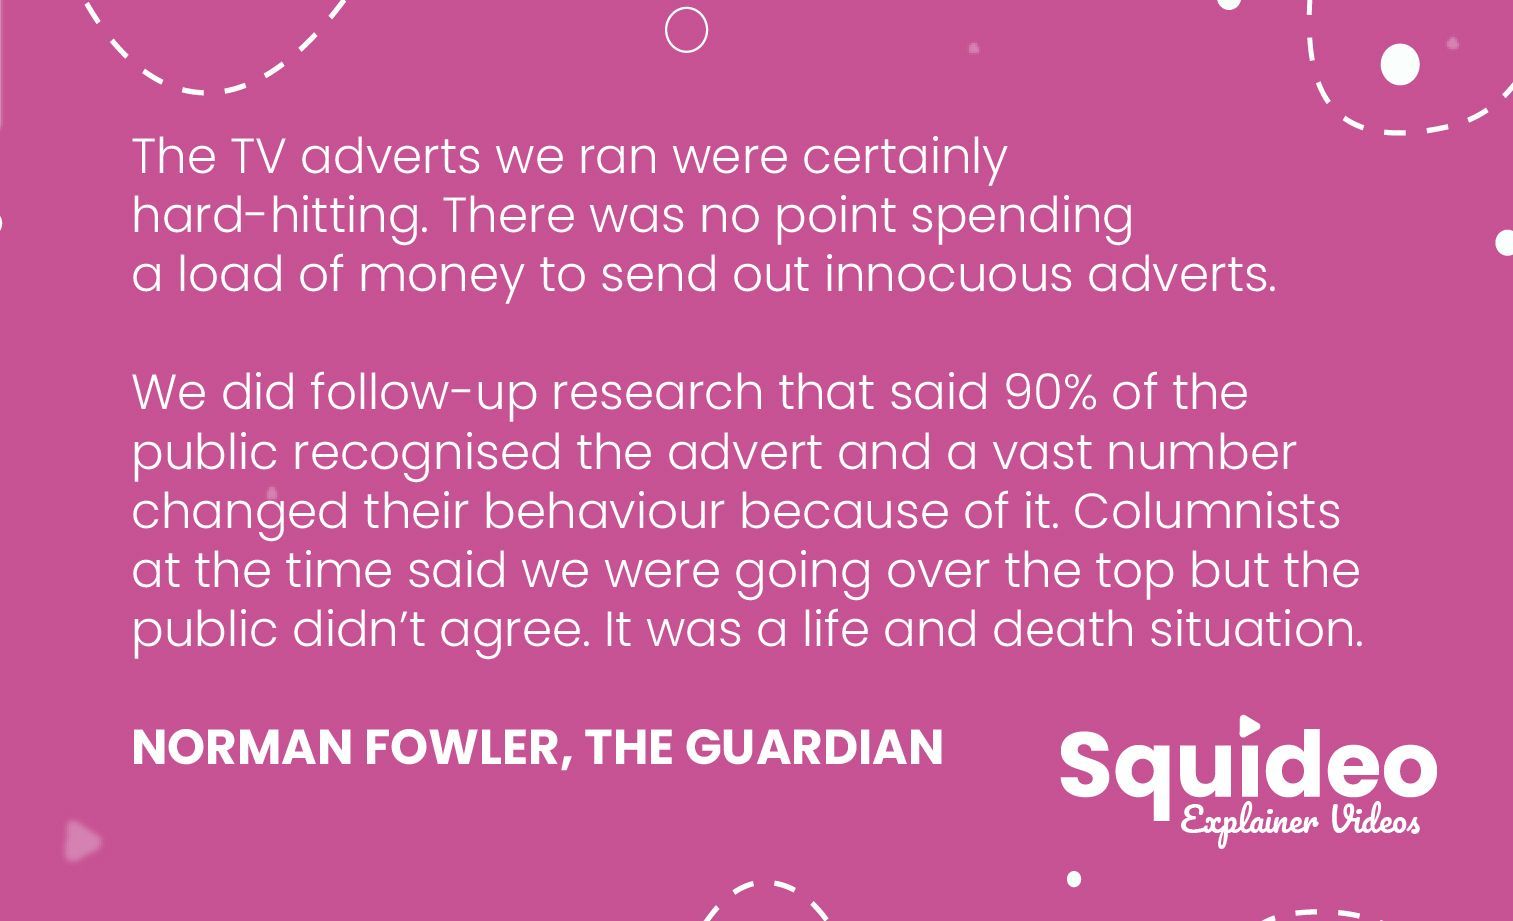 The TV adverts we ran were certainly hard-hitting. There was no point spending a load of money to send out innocuous adverts. We did follow-up research that said 90% of the public recognised the advert and a vast number changed their behaviour because of it. Columnists at the time said we were going over the top but the public didn’t agree. It was a life and death situation. NORMAN FOWLER, THE GUARDIAN